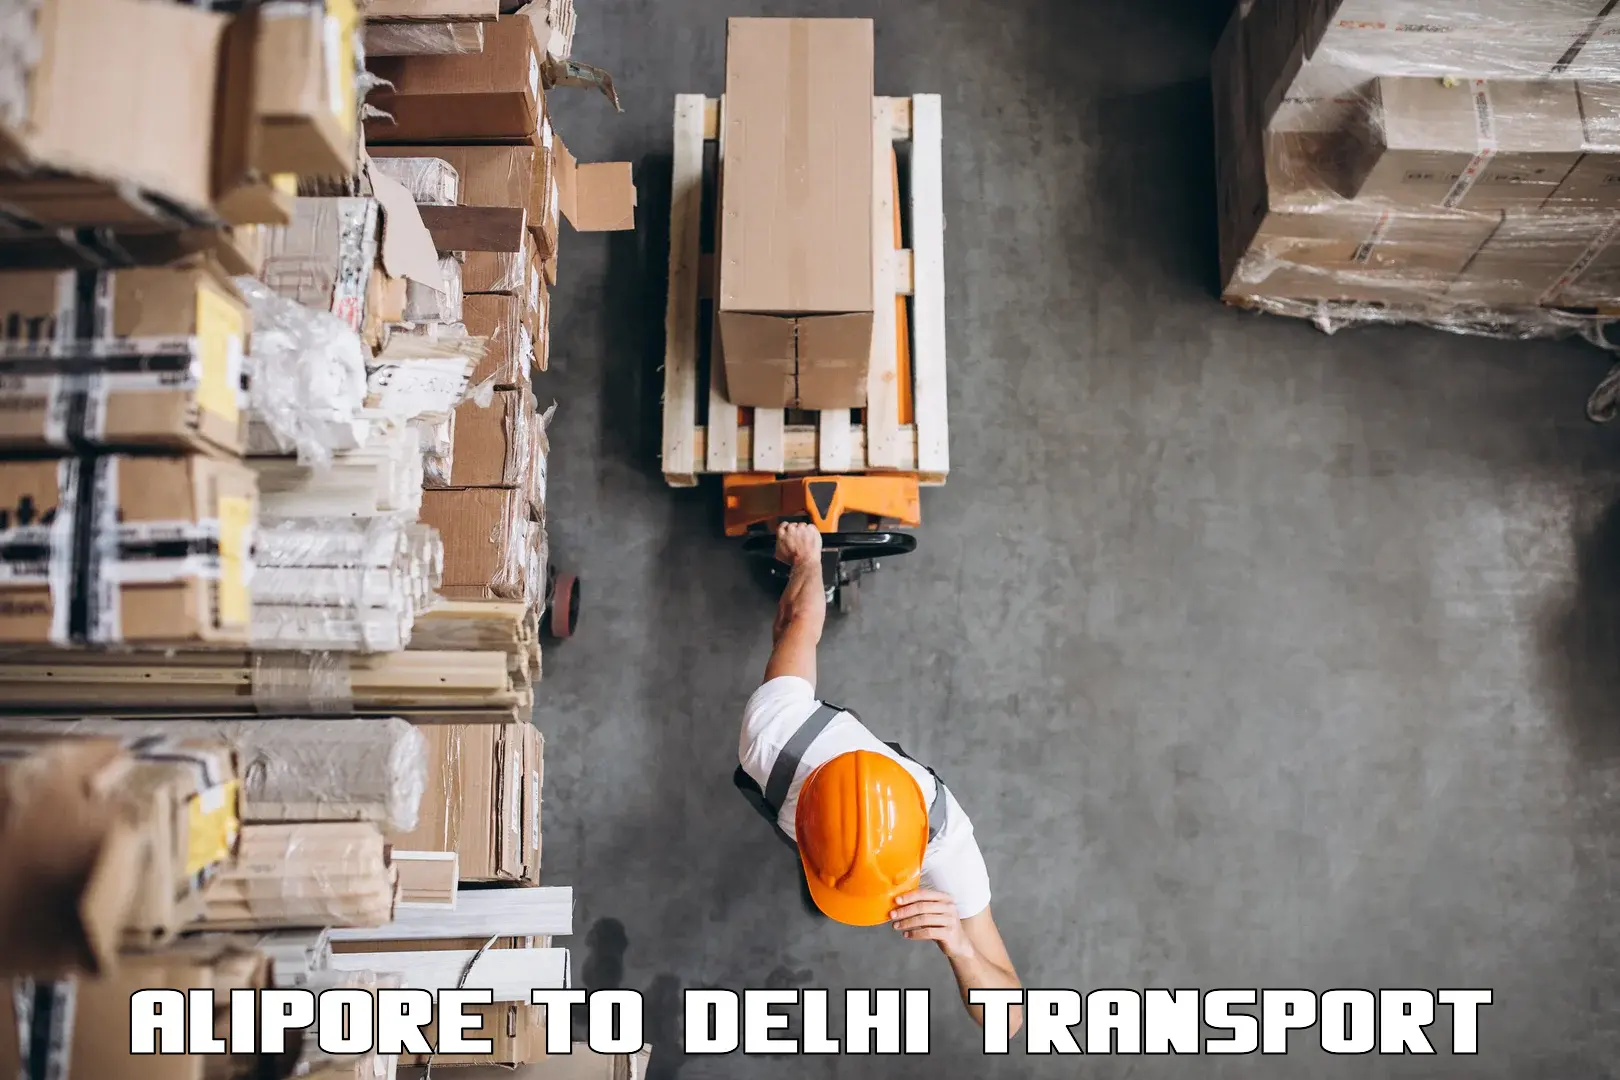 Daily parcel service transport Alipore to East Delhi